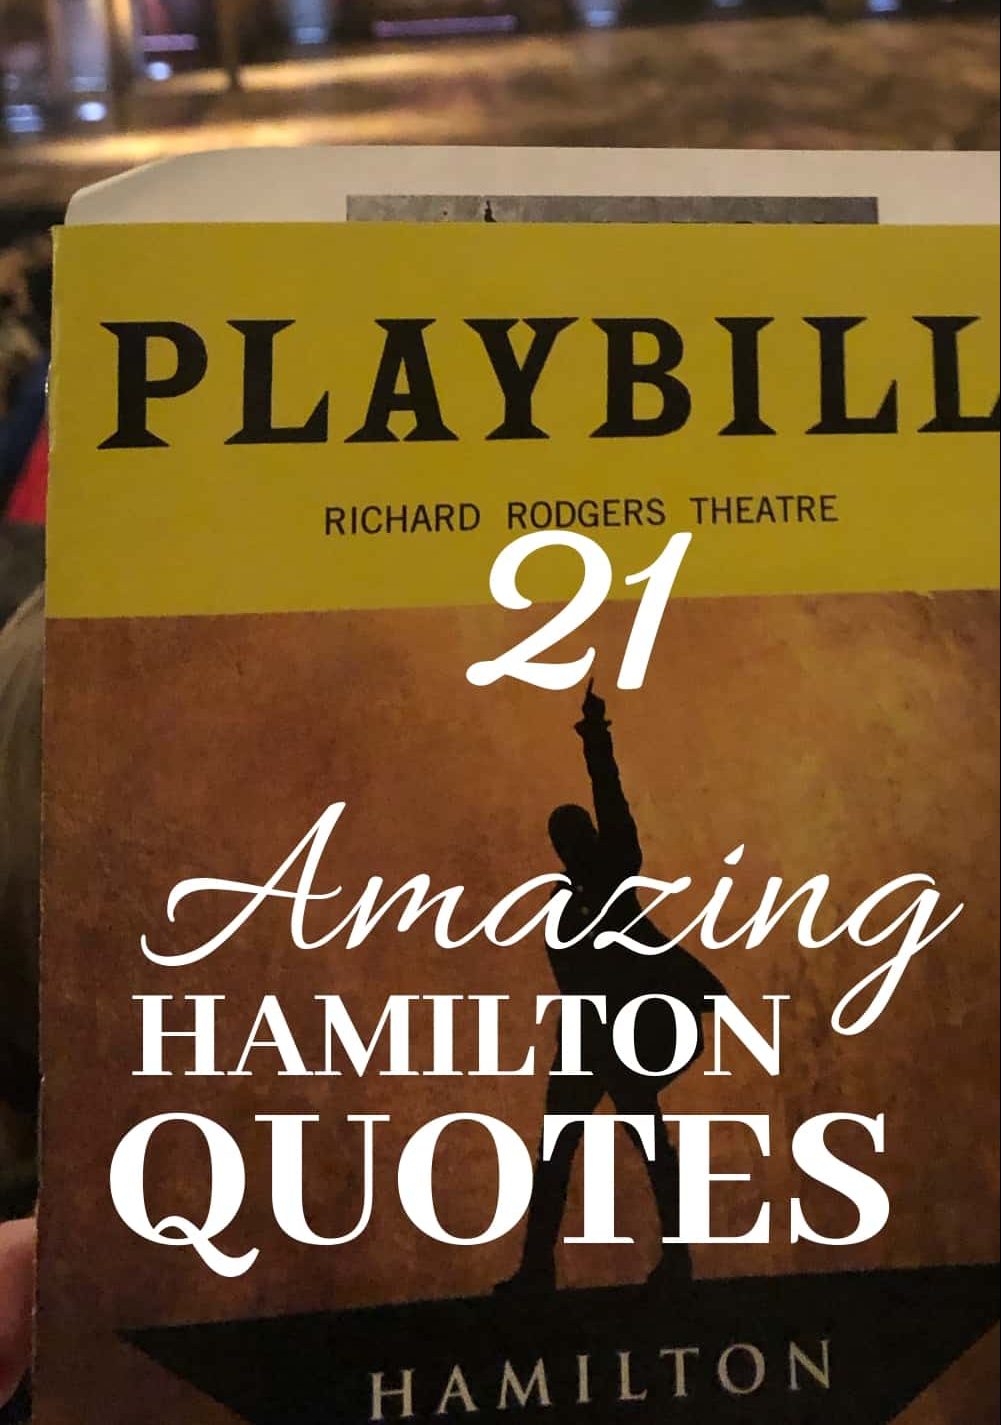 21 inspirational Hamilton Musical Quotes - If you've seen the show, you know how music and the lyrics stay with you as much as the individual performance of the actors. Eliza, Angelica, Alexander, Phillip, Burr, Washington all come to live. #lyrics #inspirational #waitforit ♥︎cheerfulcook.com via @cheerfulcook